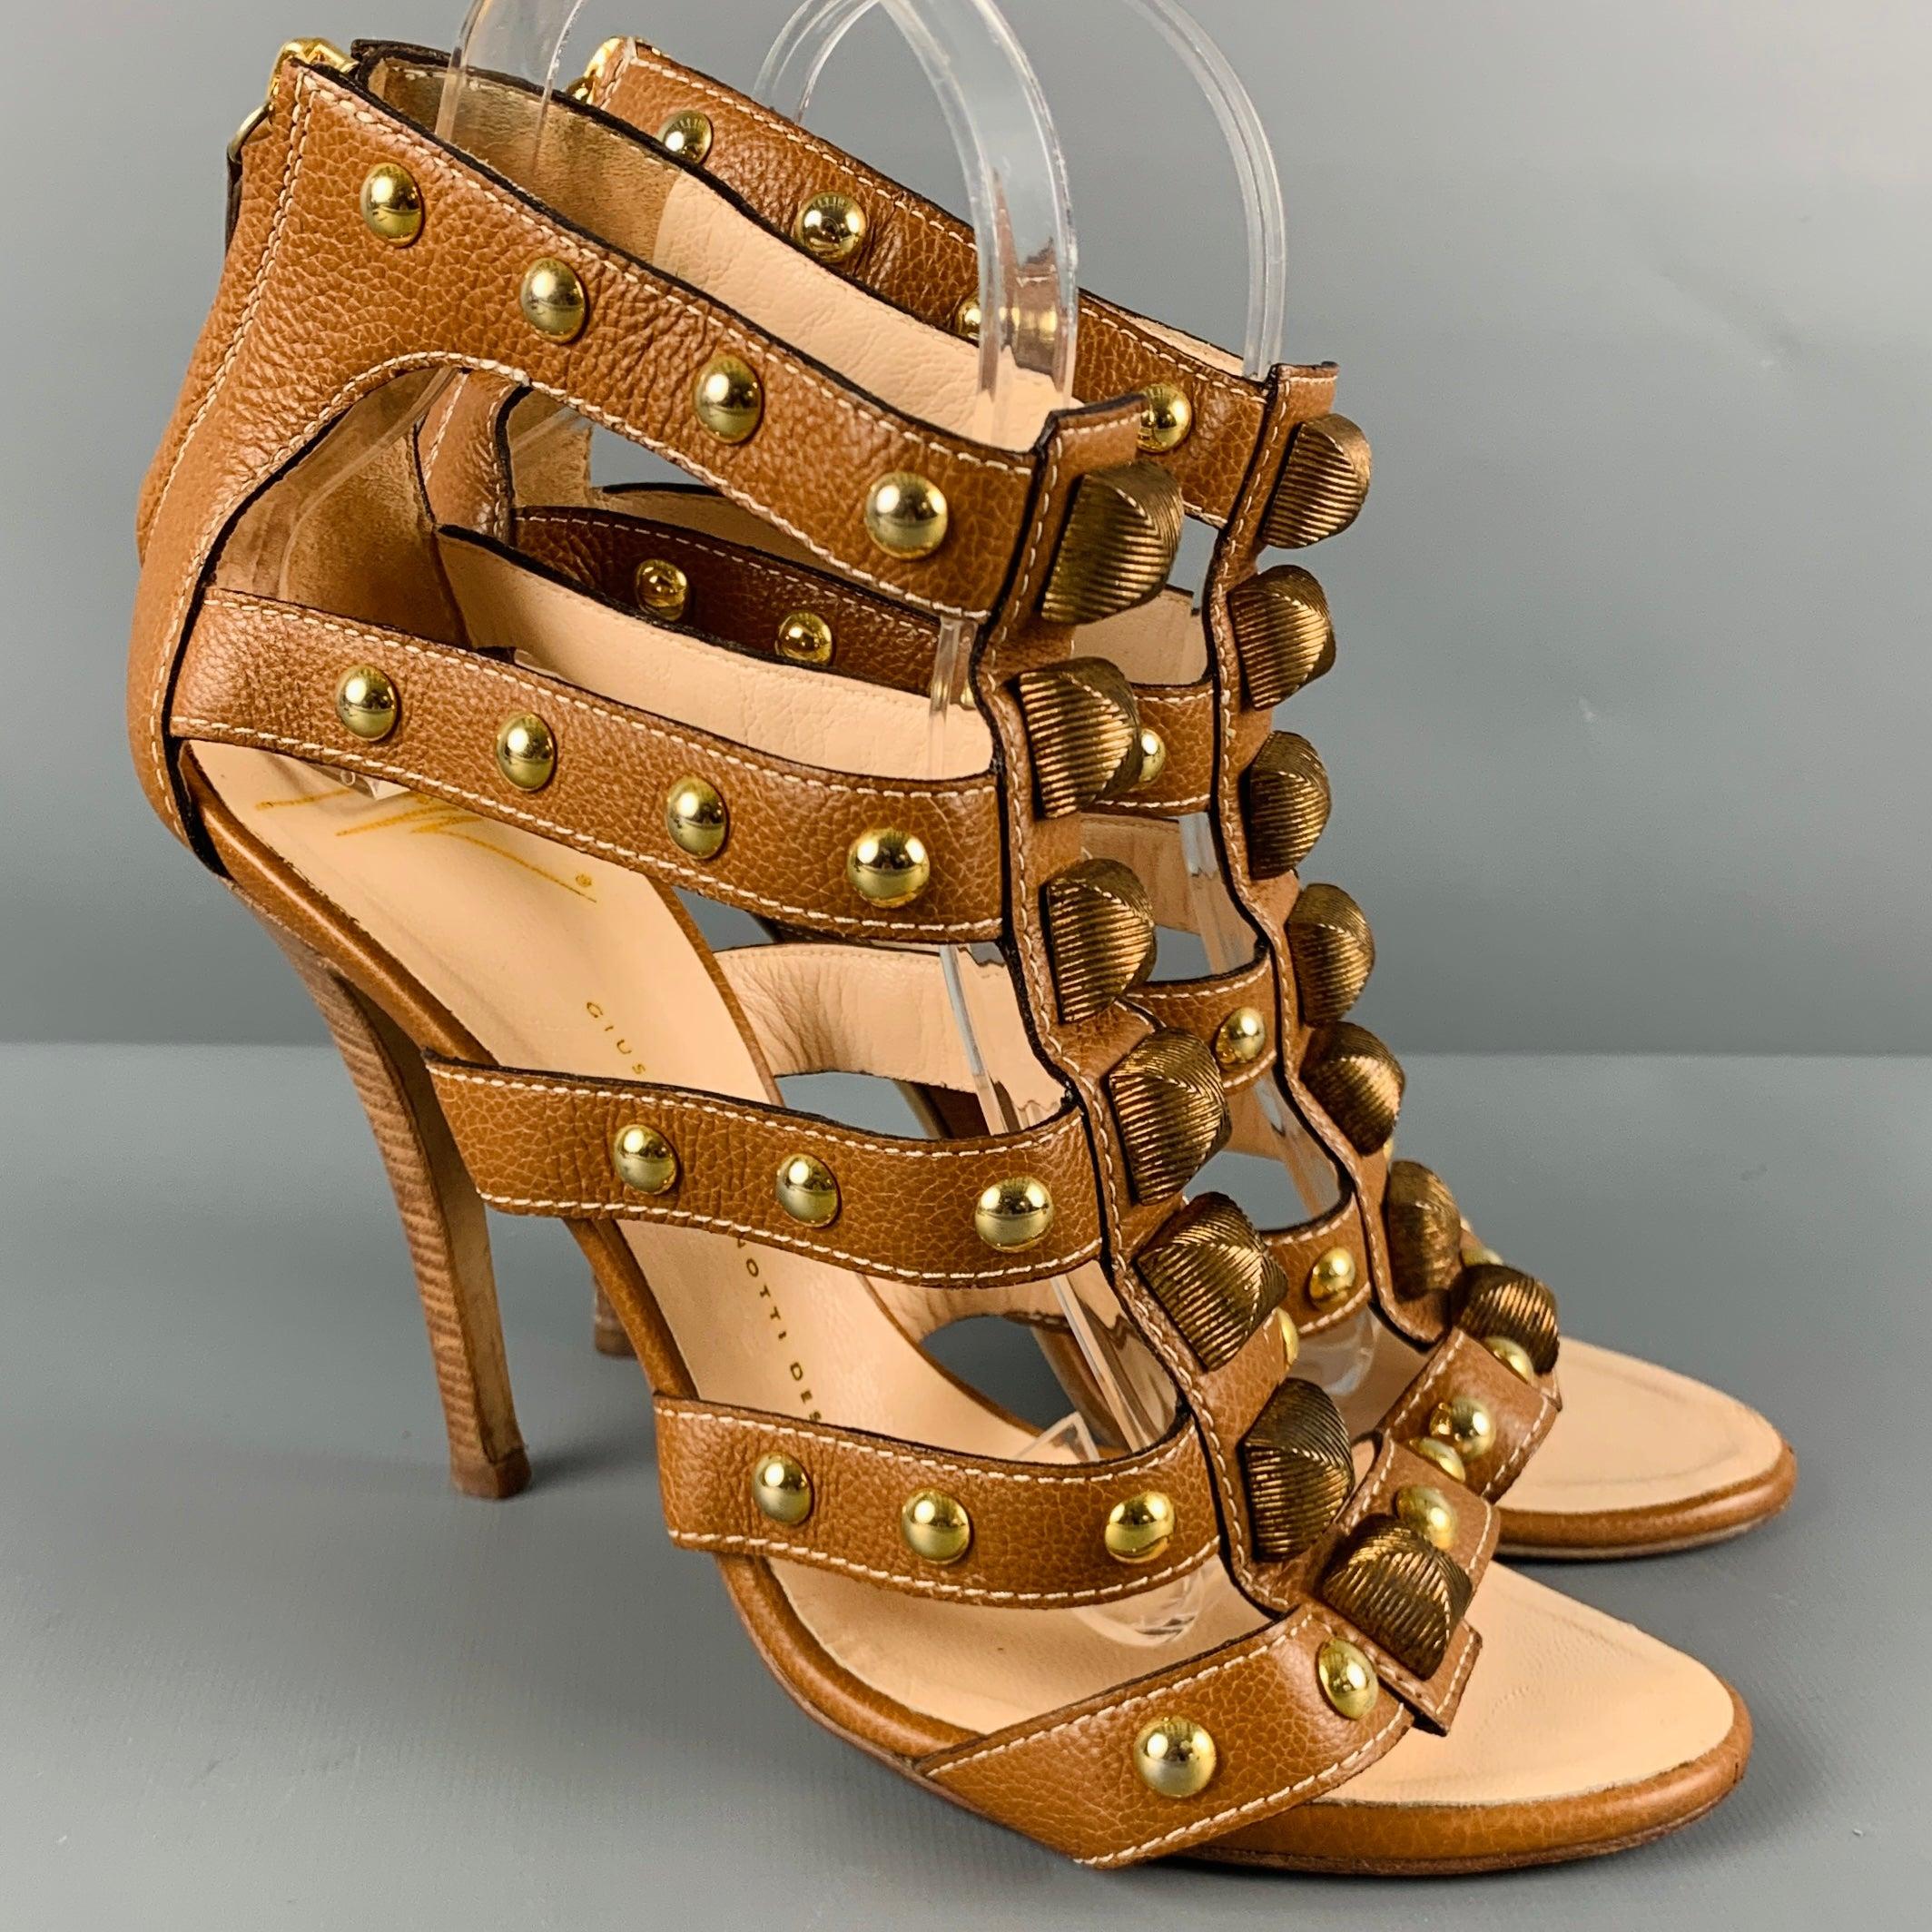 GIUSEPPE ZANOTTI sandals
in a brown leather fabric featuring a gladiator style, gold tone studs, and back zipper closure. Made in Italy.Very Good Pre-Owned Condition. 

Marked:   38 

Measurements: 
  Heel: 4.5 inches 
  
  
 
Reference No.: